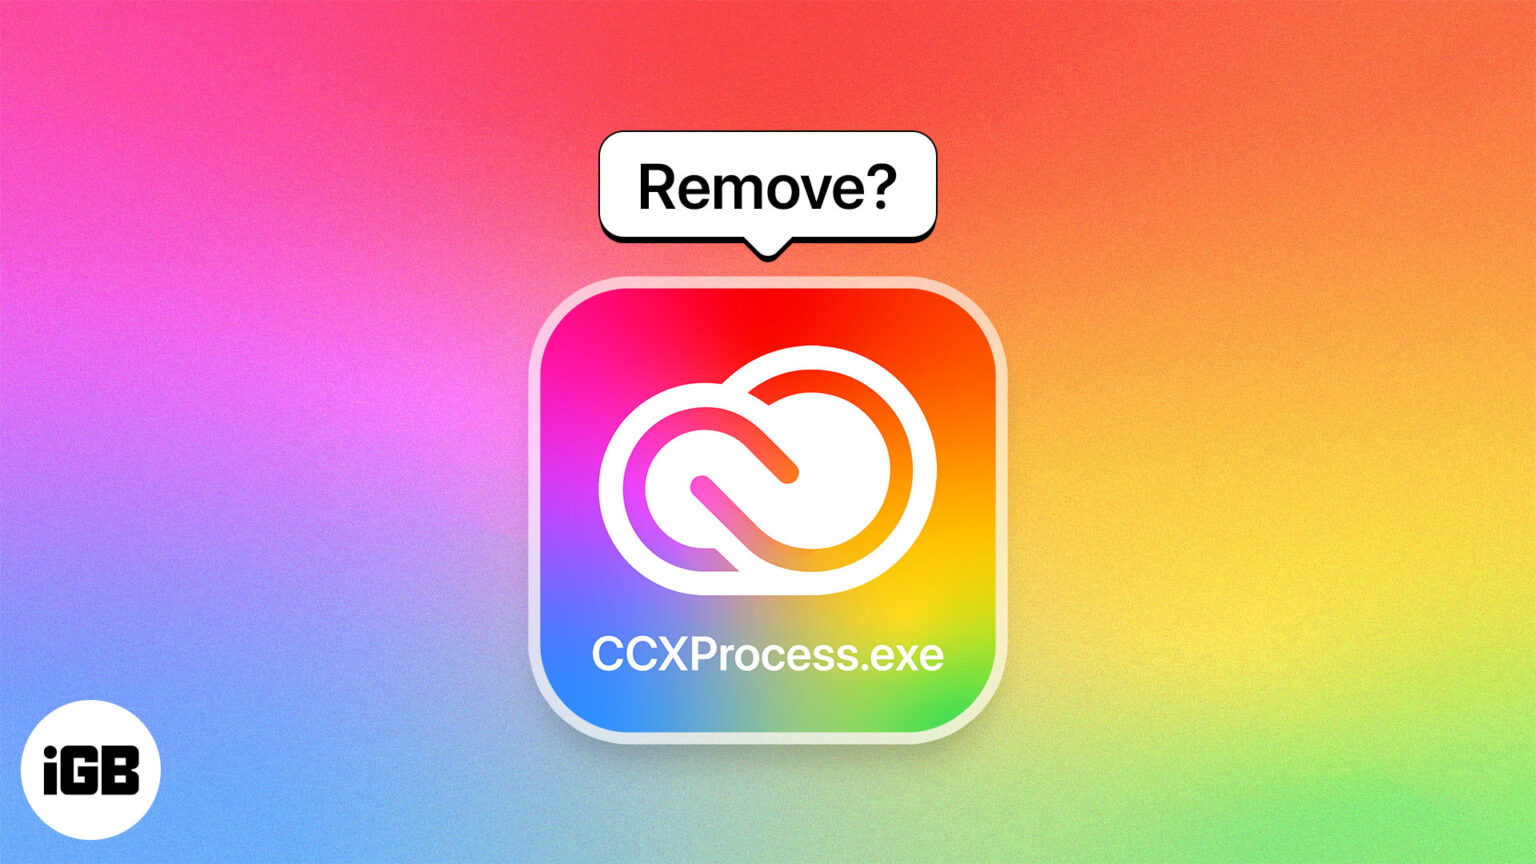 What is CCXProcess on Mac, and how to remove it